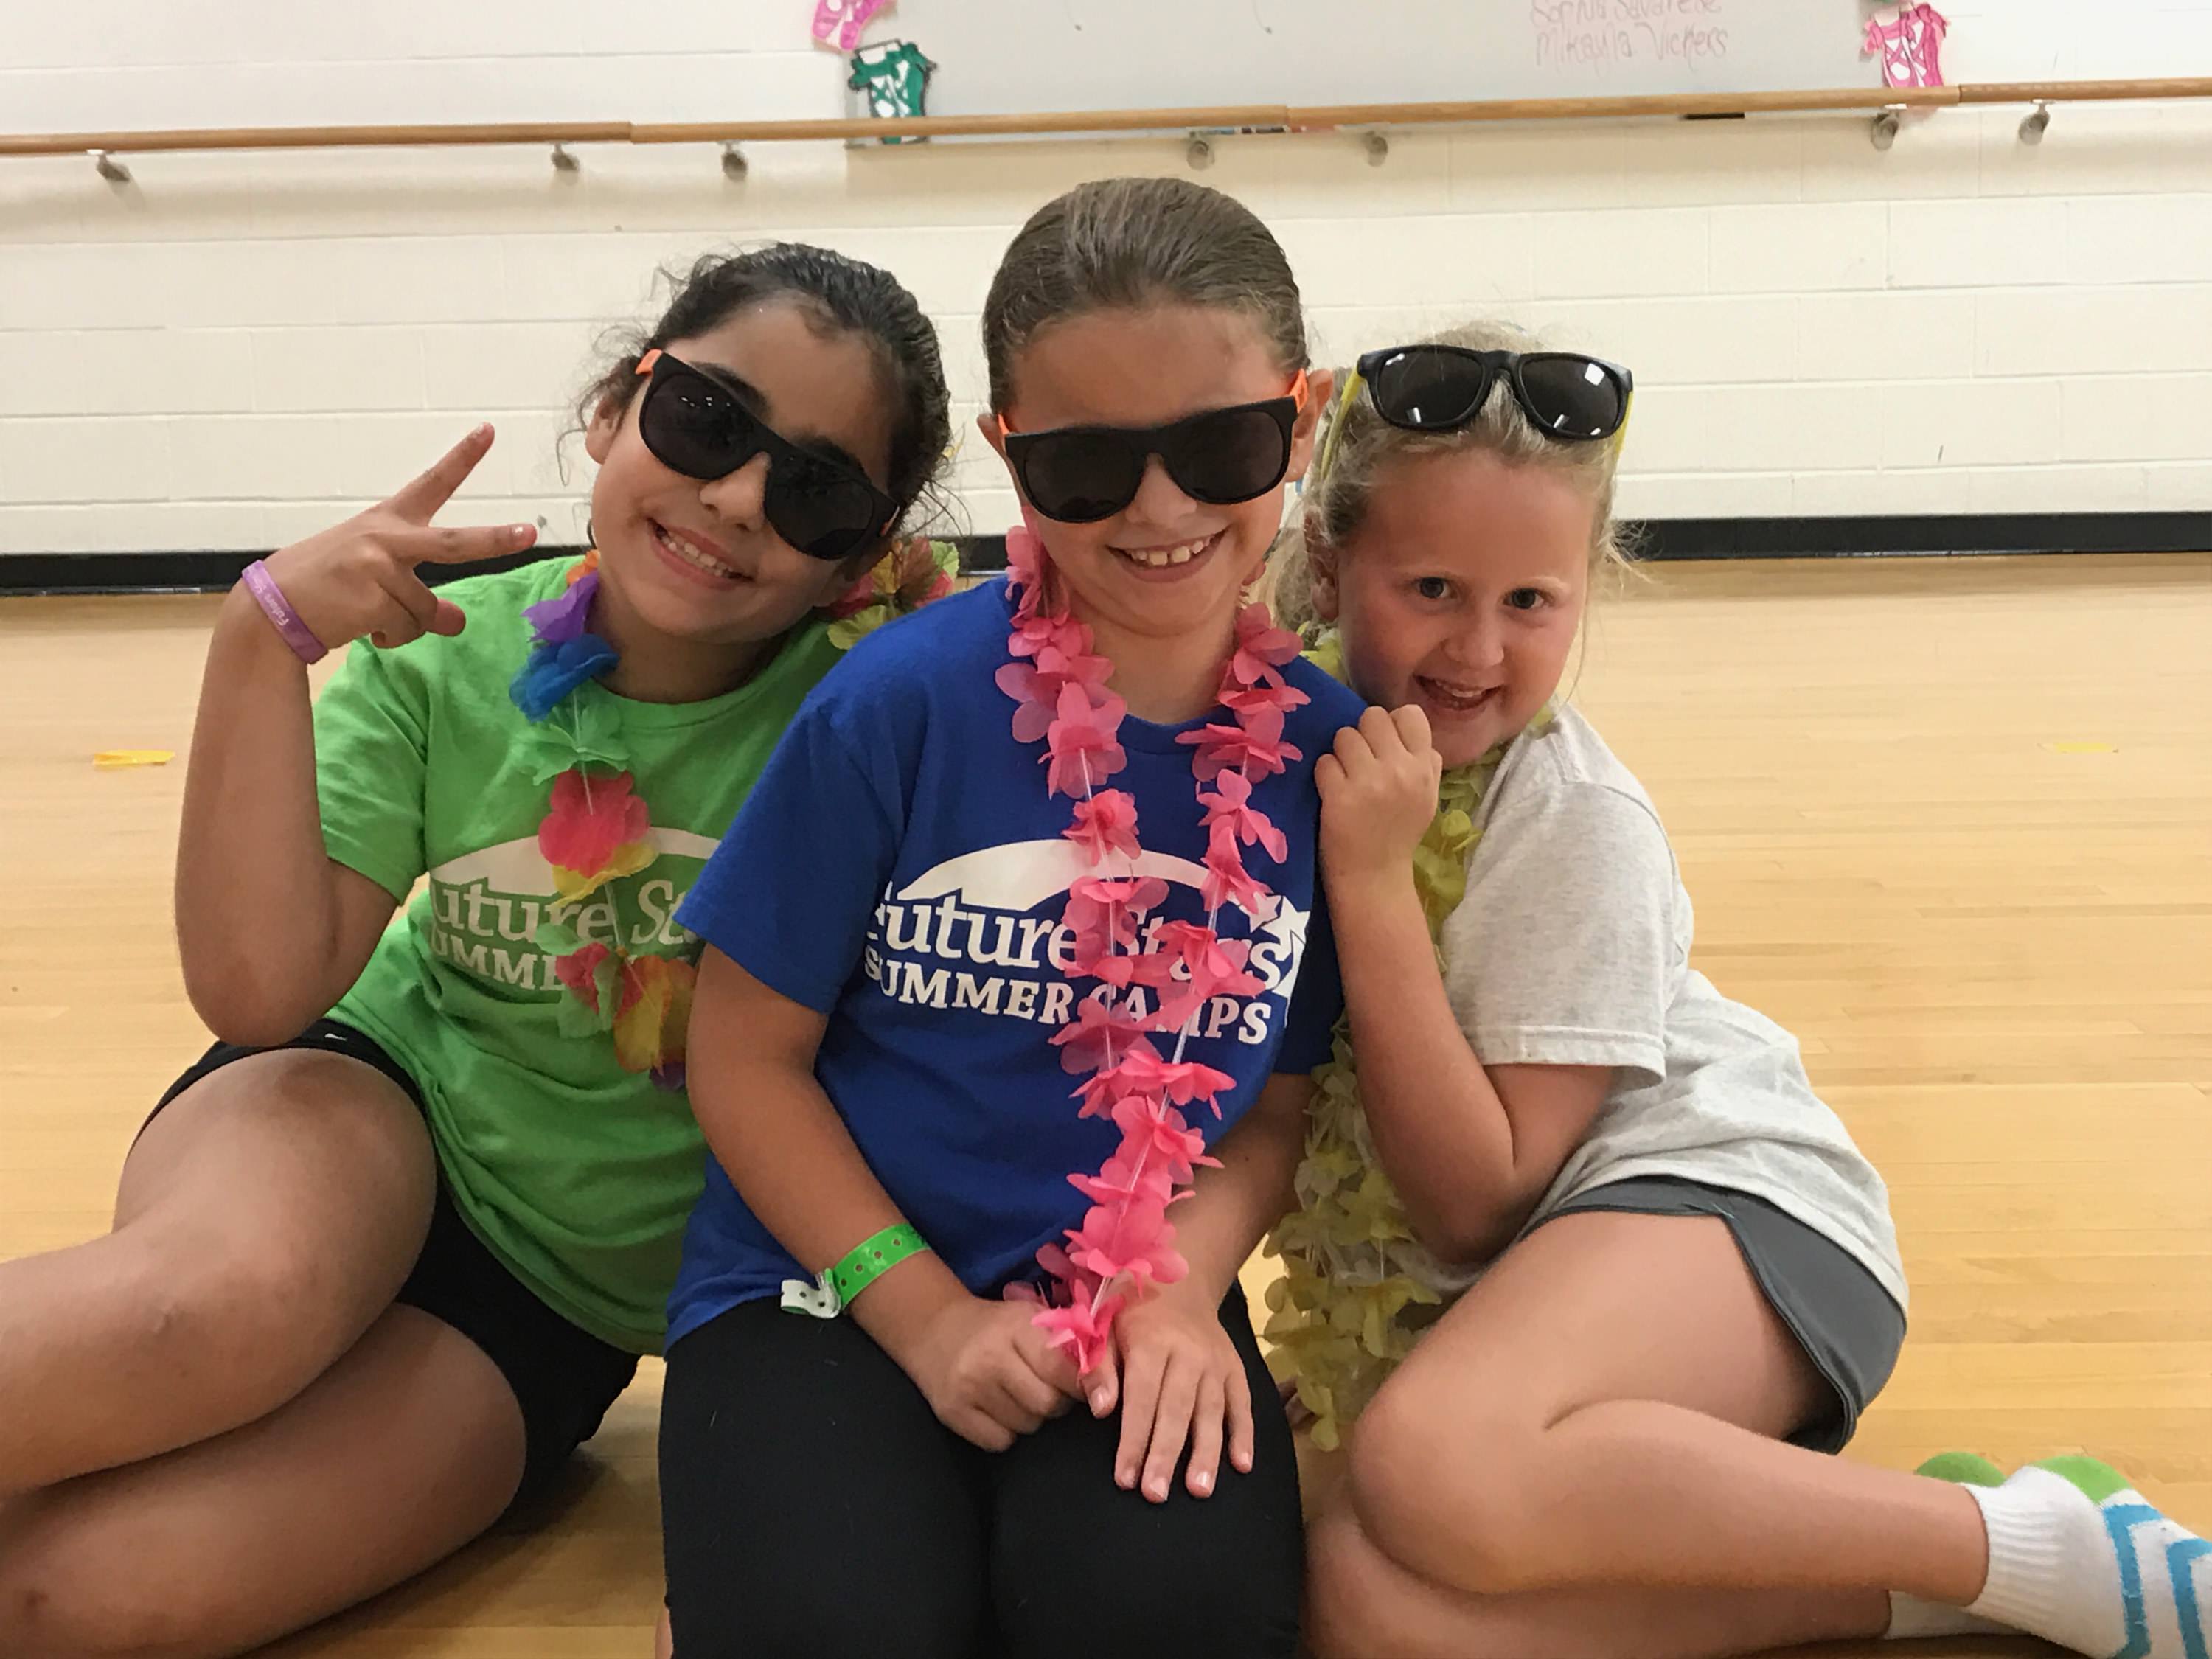 Happy, smiling campers at Future Stars summer camp